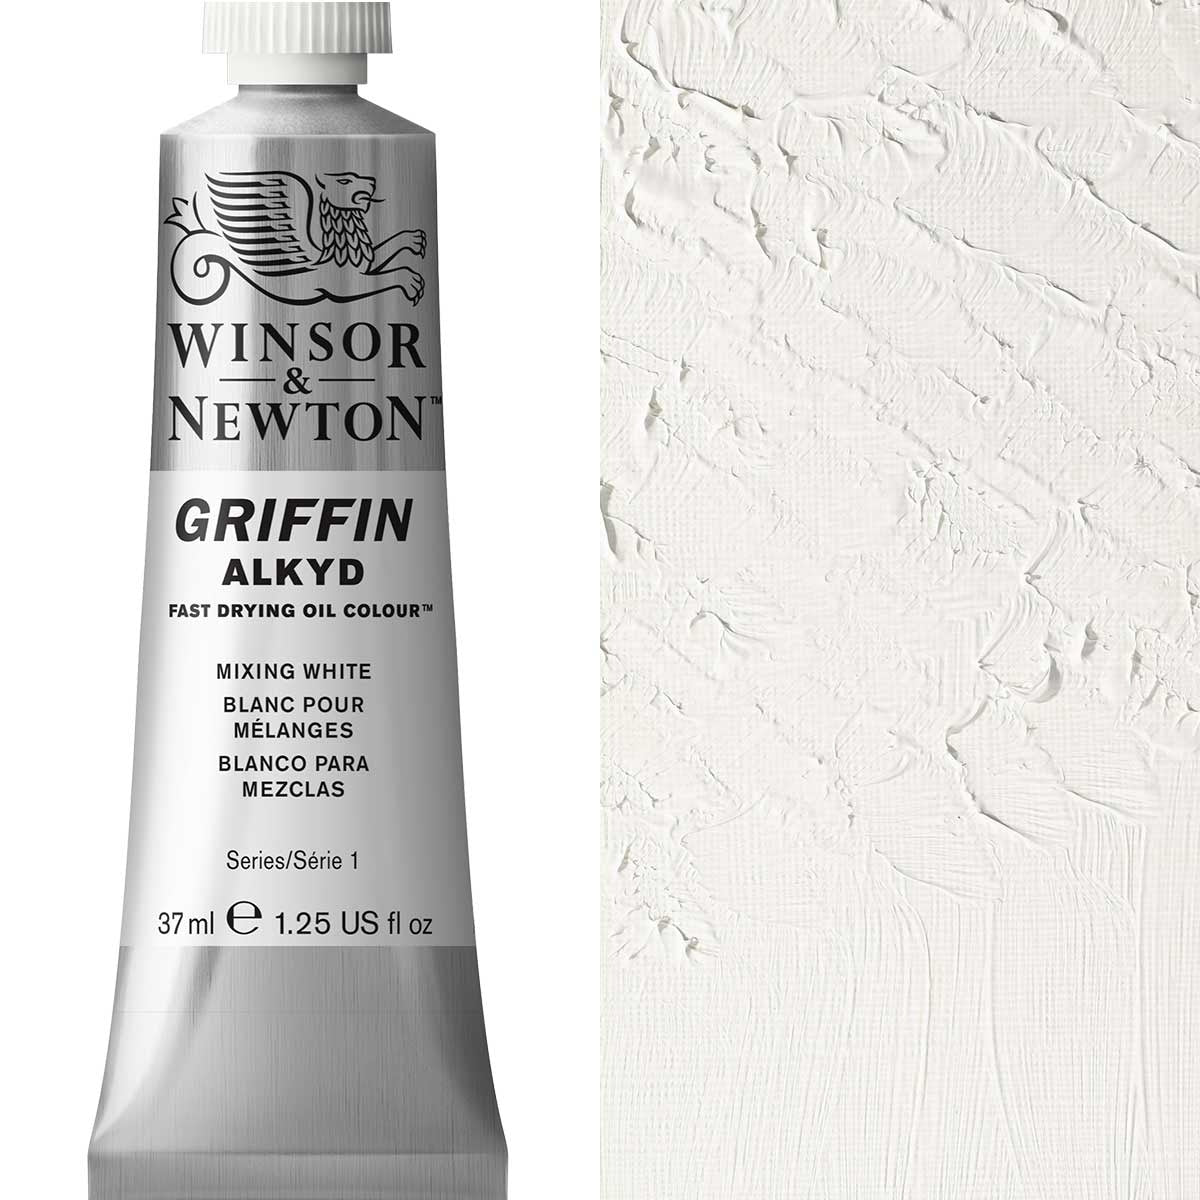 Winsor and Newton - Griffin ALKYD Oil Colour - 37ml - Mixing White